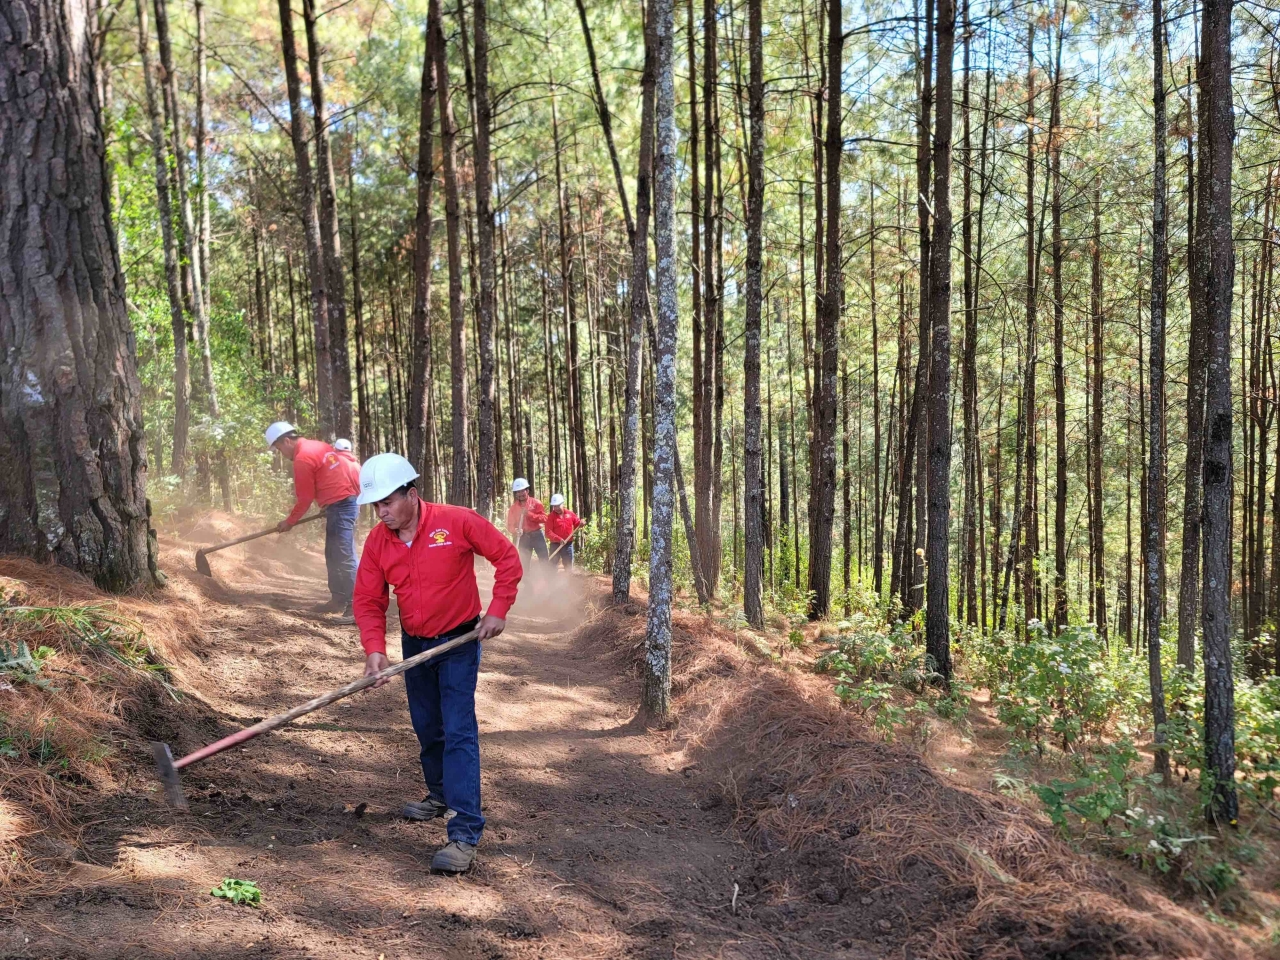 Local project members clean the forest floor in Mexico to create a fire brigade for forest protection. Cool Effect’s Seeing the Forest for the Trees project encourages community residents to preserve and restore damaged areas of the forest.